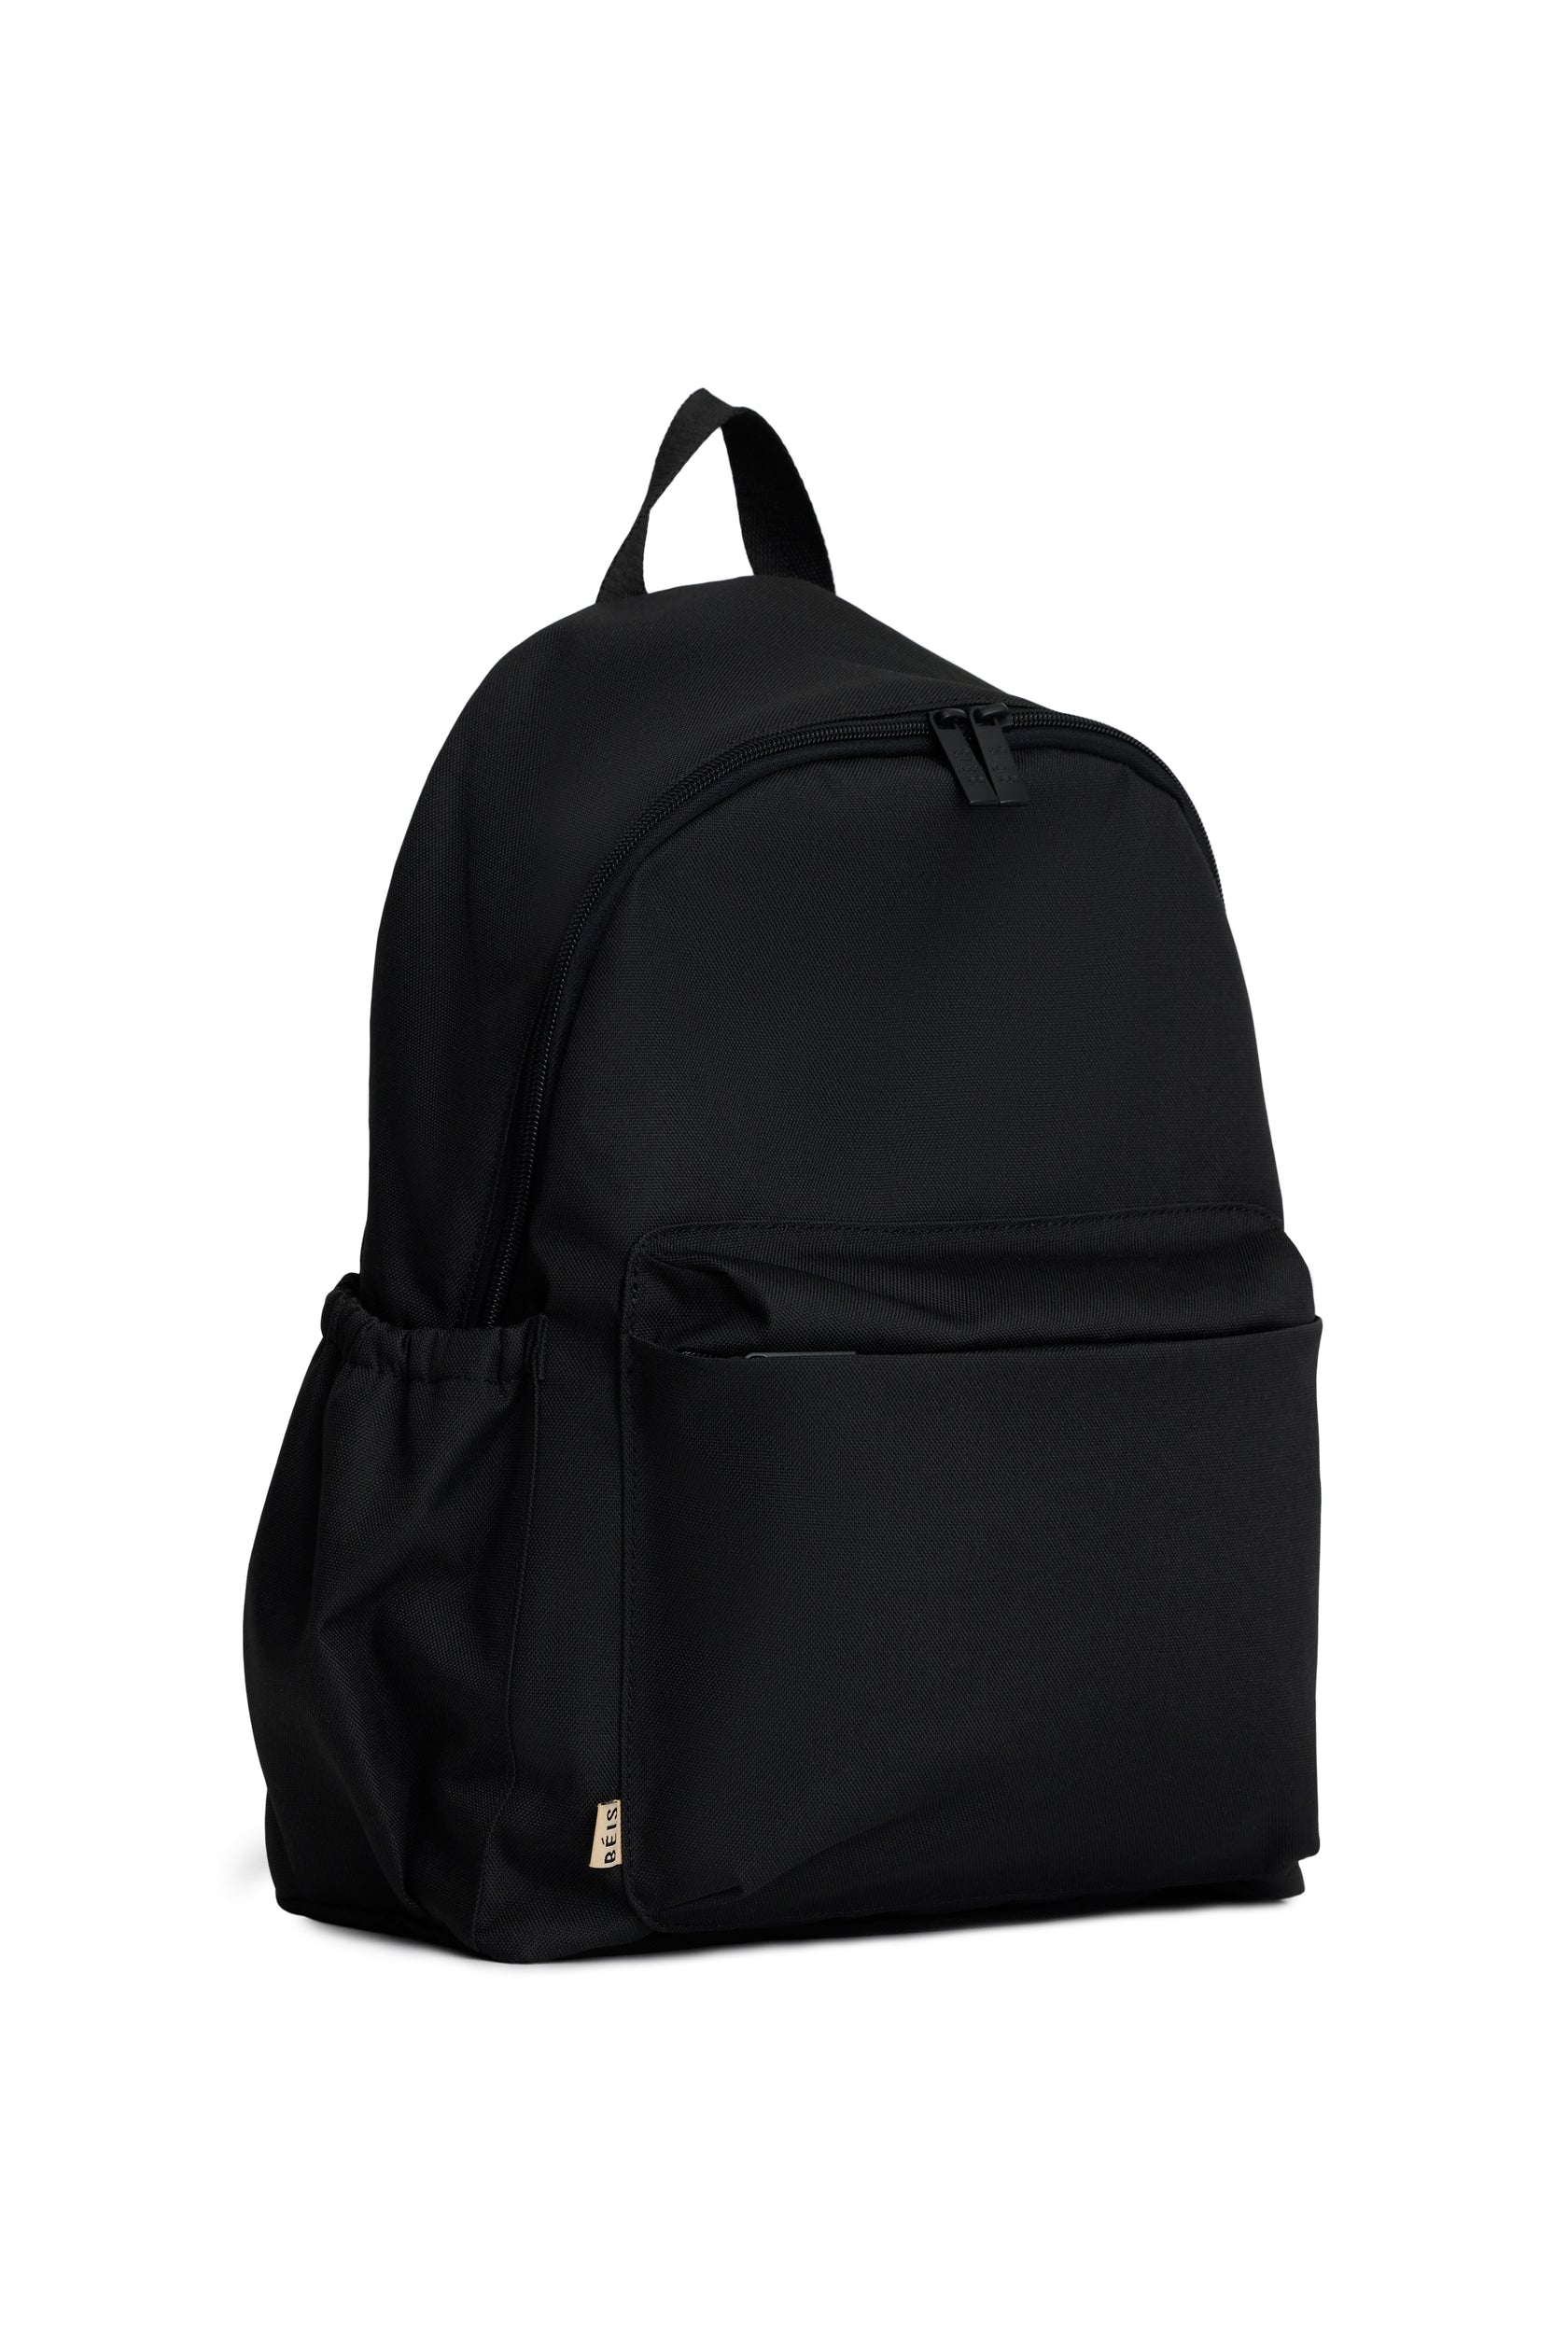 BÉIS 'The BEISICS Backpack' in Black - Backpack For Work & Travel With ...